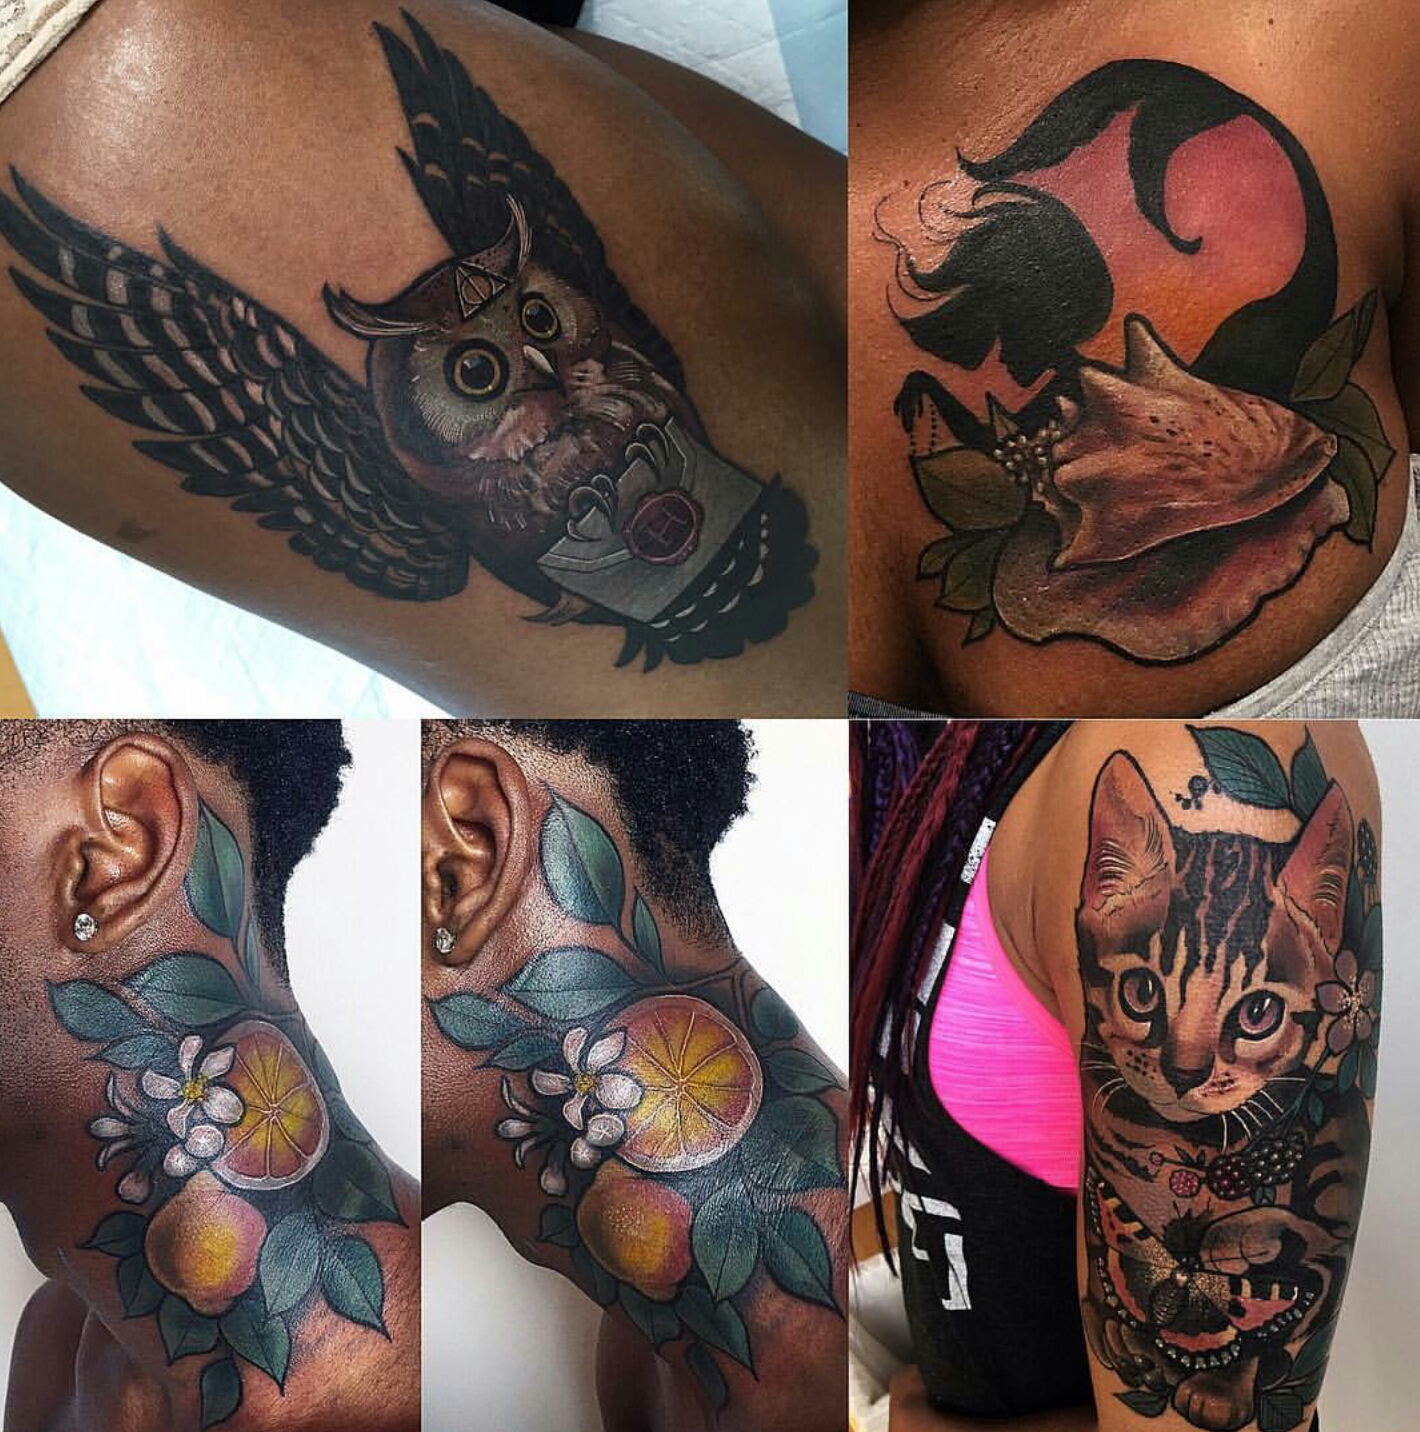 10+ Pictures of Black and Gray Tattoos Transformed With Pops of Color